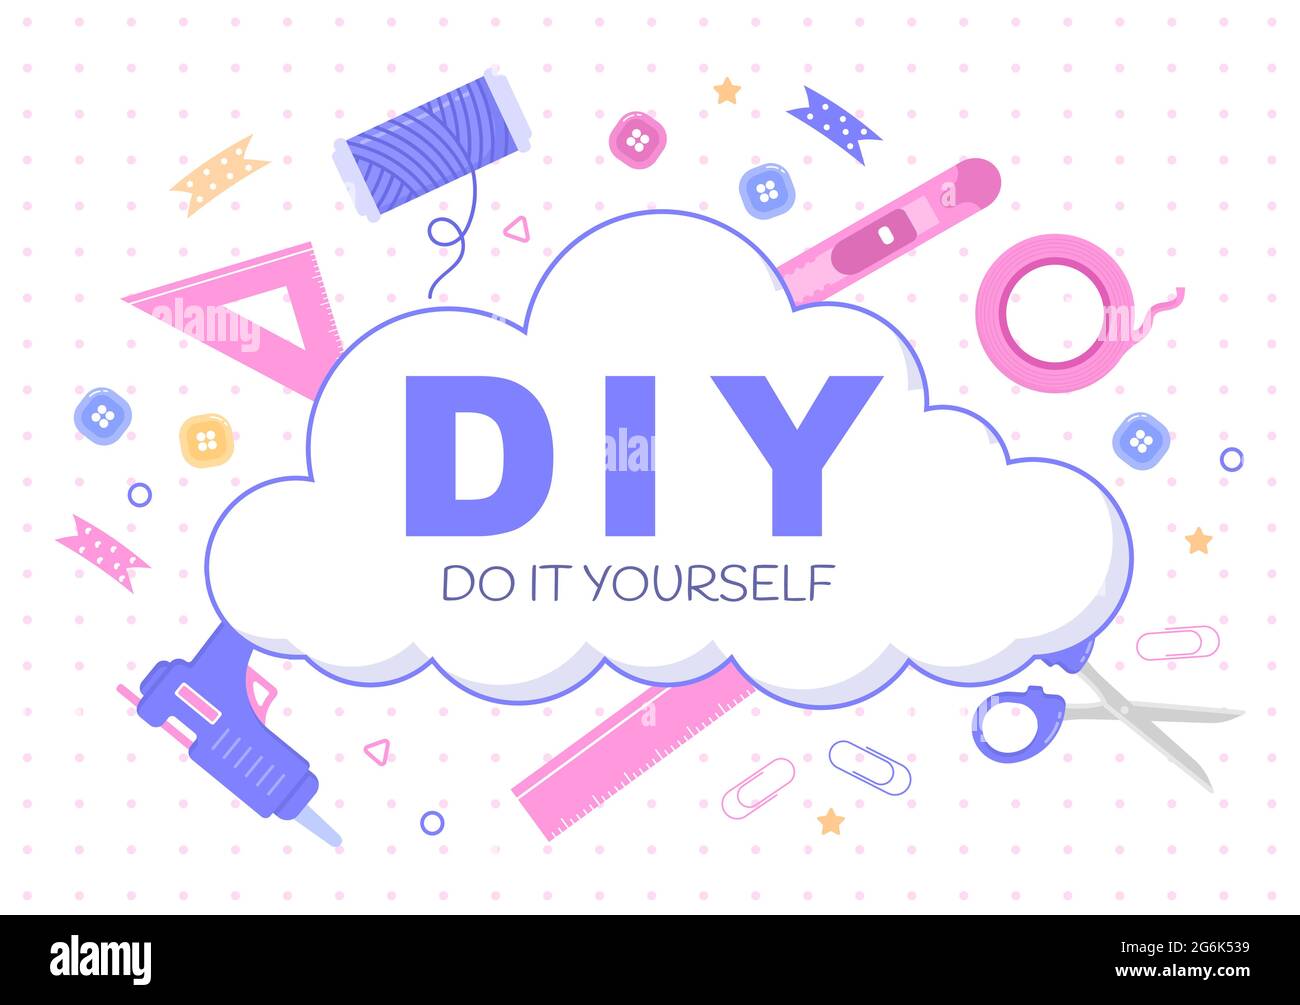 DIY Tools Do It Yourself Background Illustration For Home